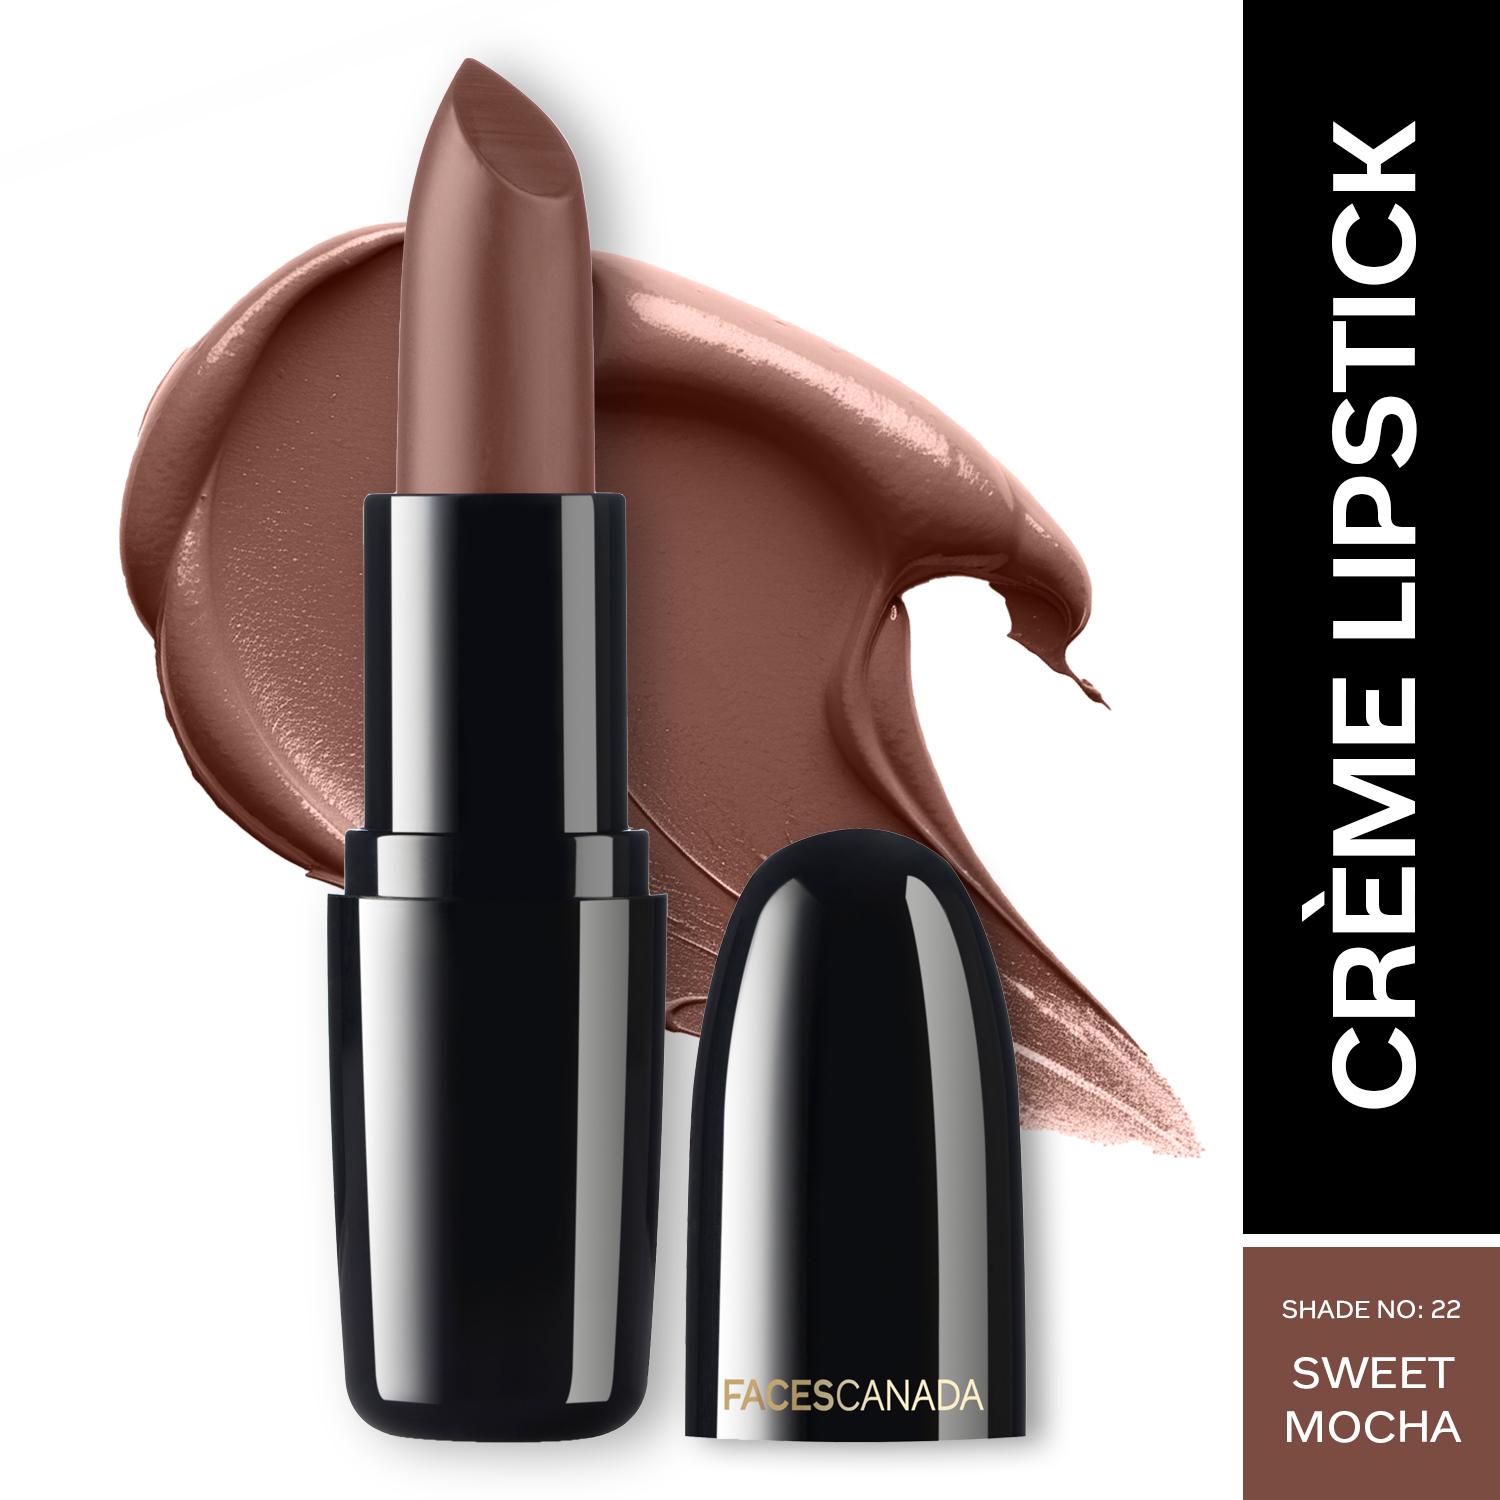 Faces Canada | Faces Canada Weightless Creme Finish Lipstick, Creamy Finish, Hydrated Lips - Sweet Mocha 22 (4 g)